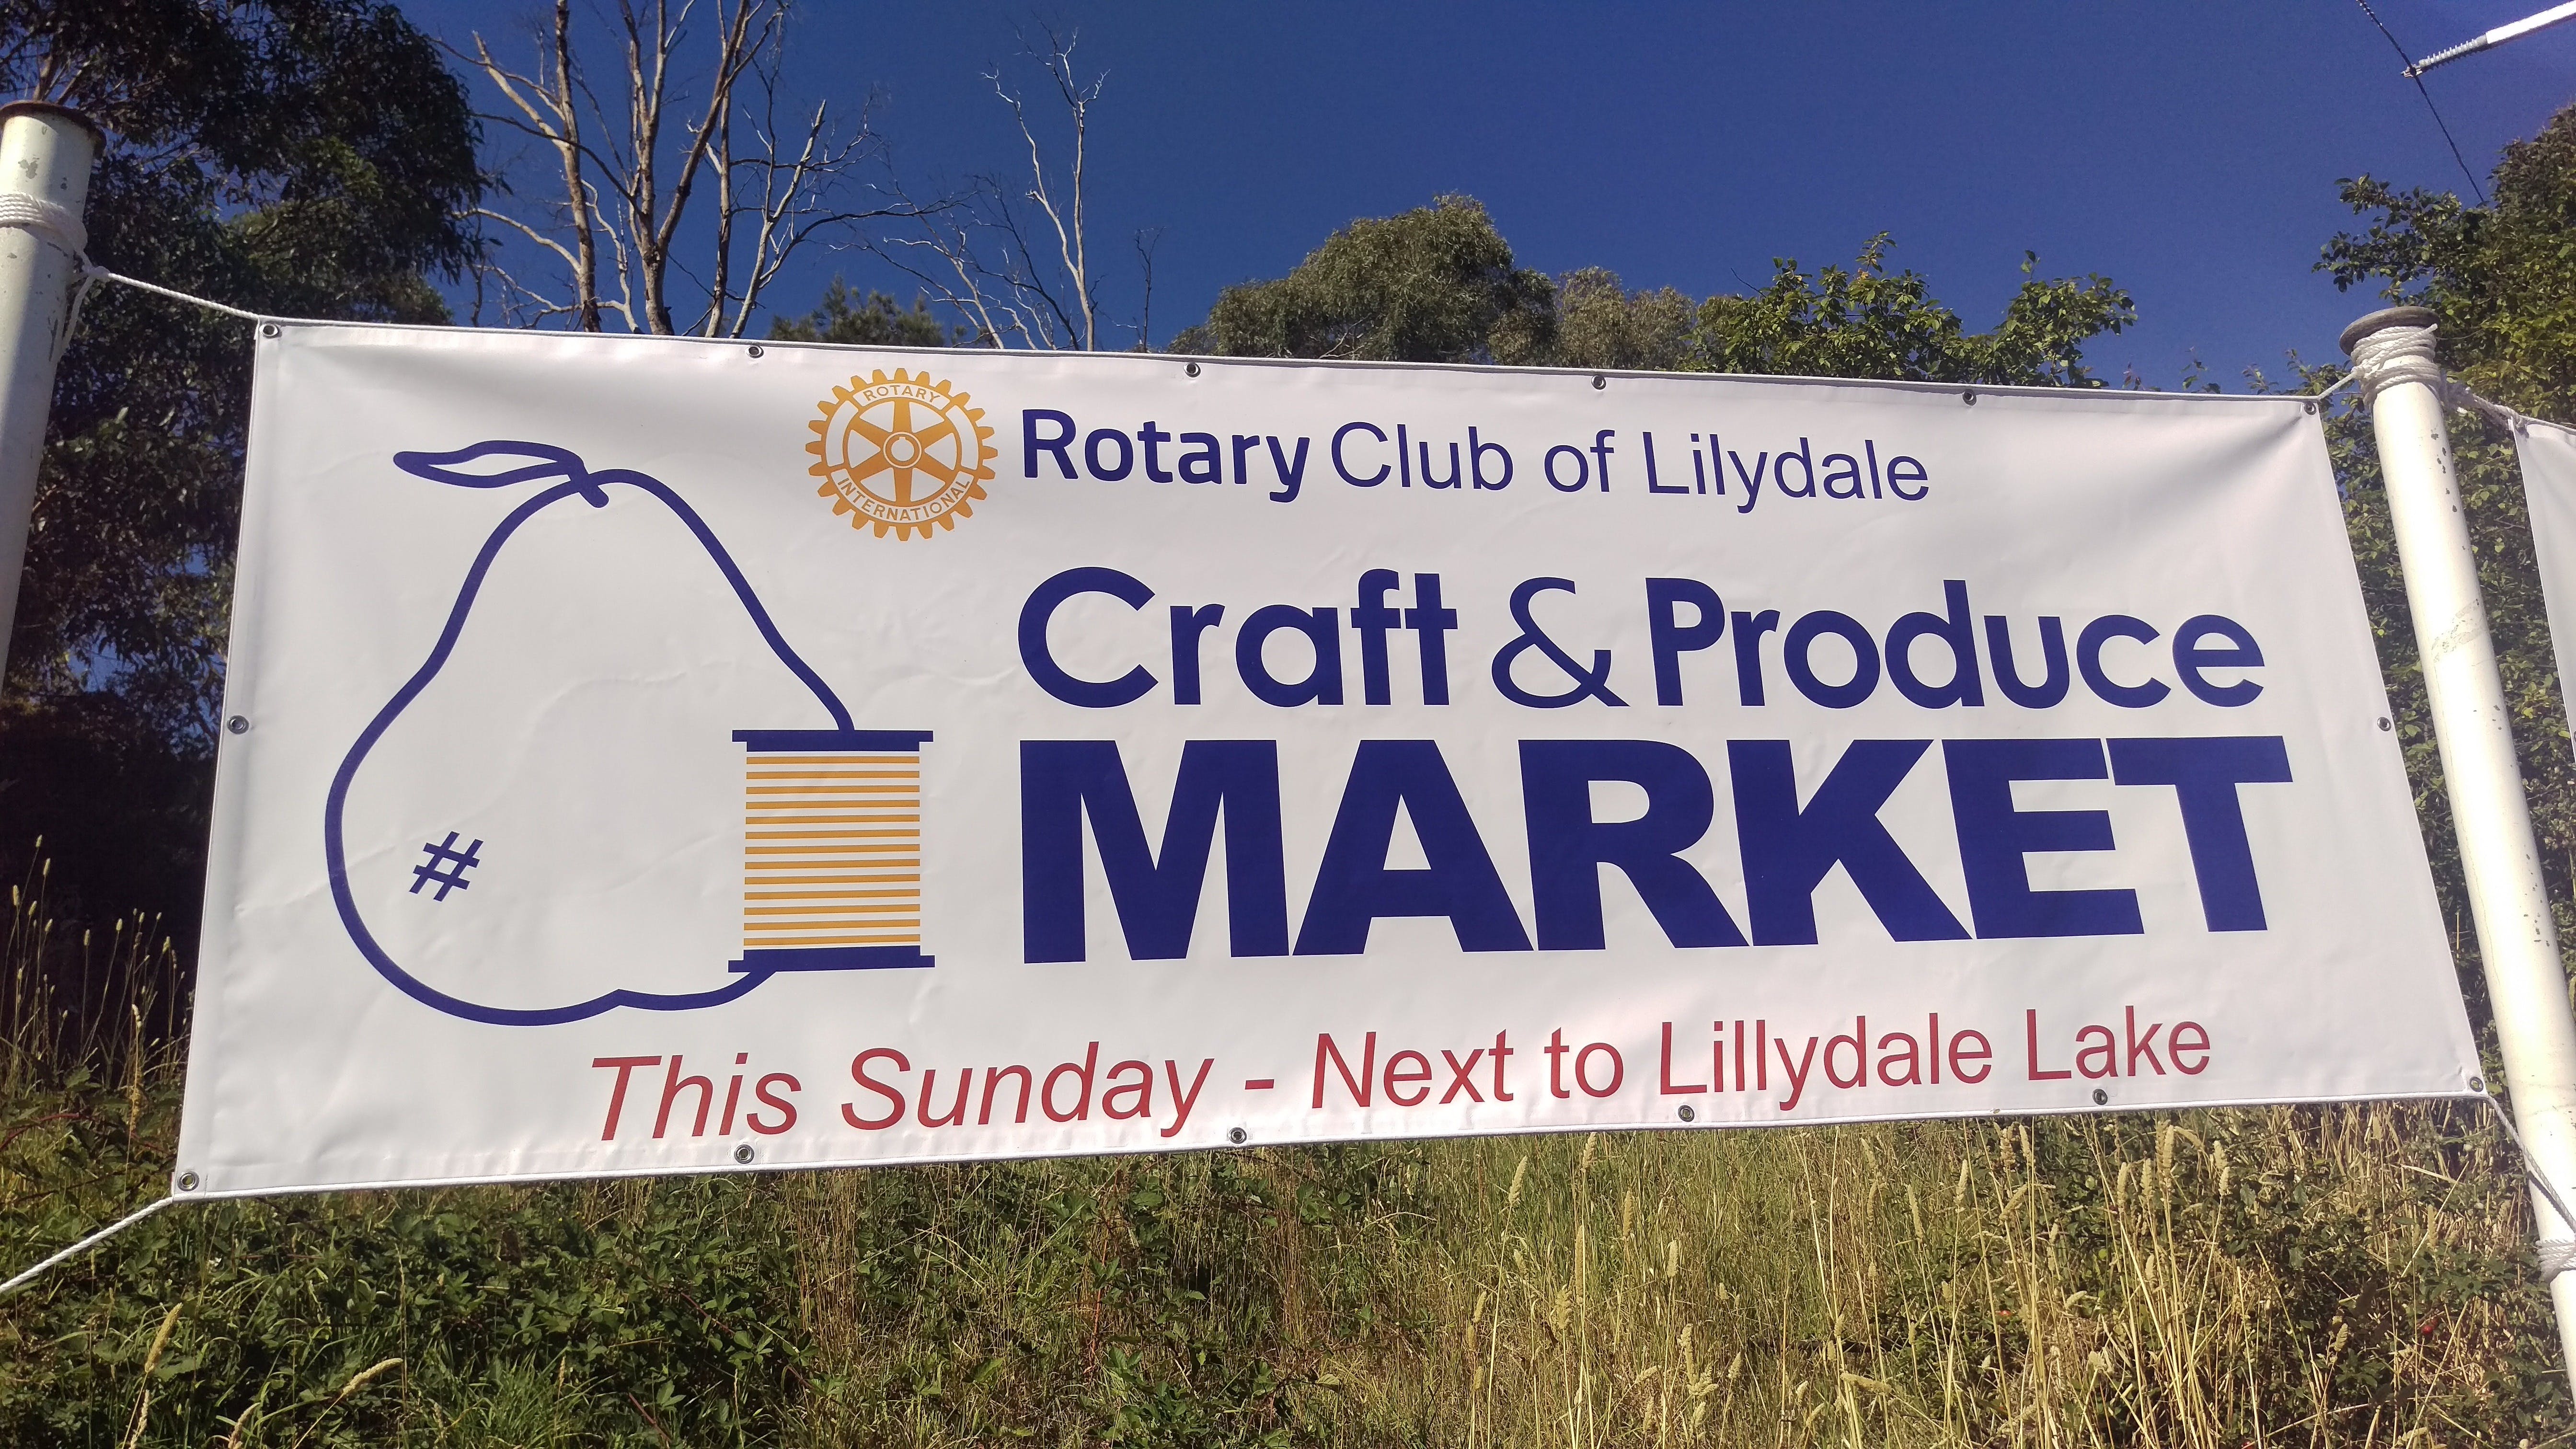 Rotary Club of Lilydale Craft and Produce Market - St Kilda Accommodation